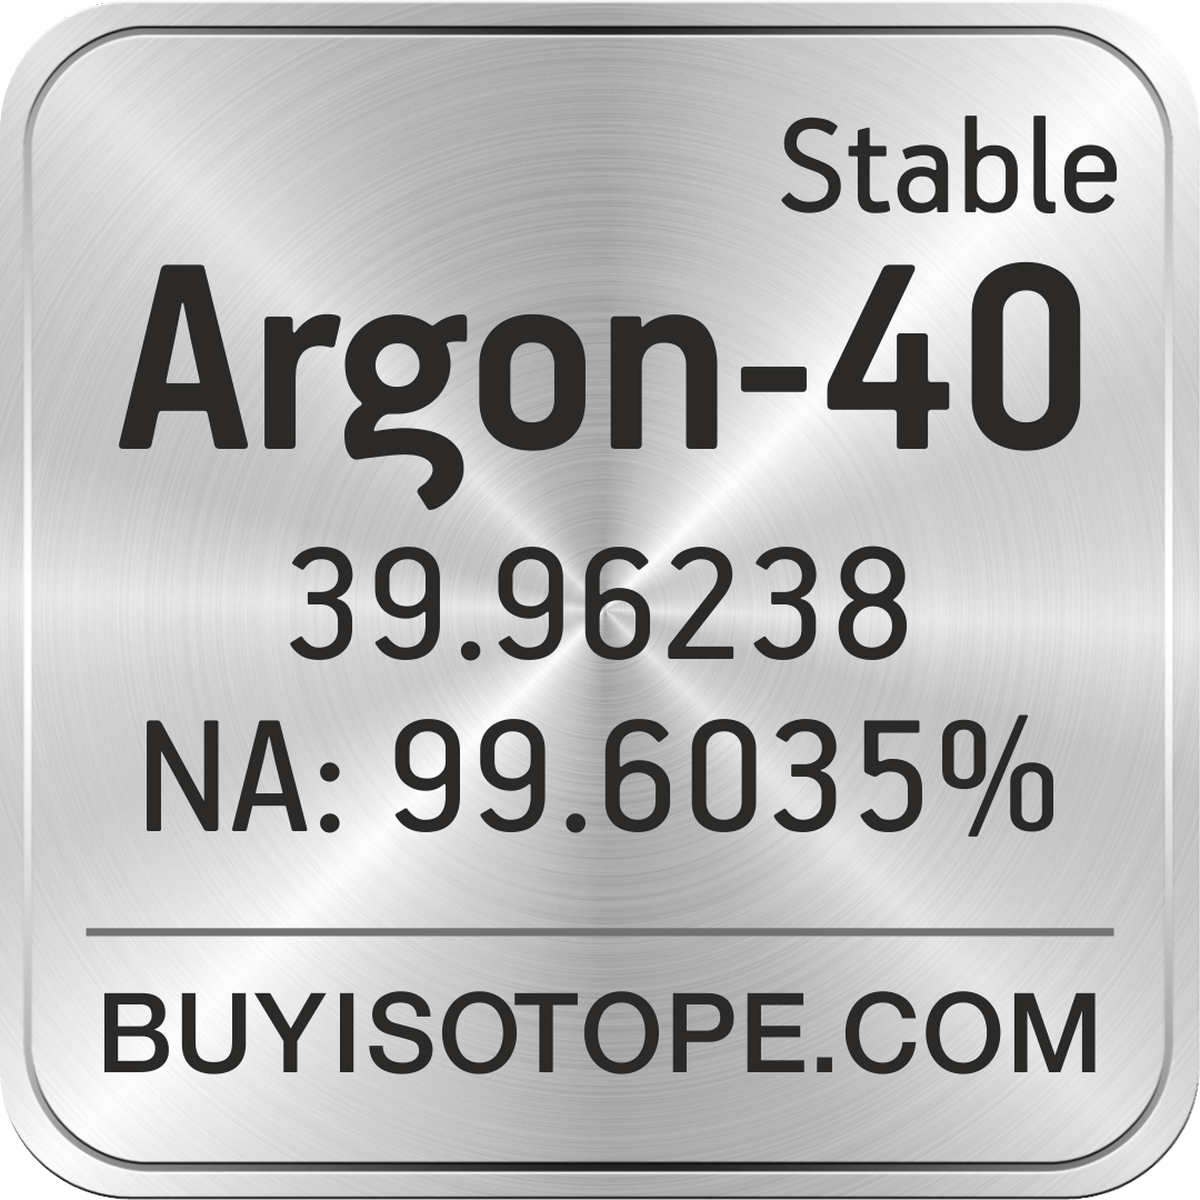 https://www.buyisotope.com/isotope-images/argon-40-isotope-argon-40-enriched-argon-40-abundance-argon-40-buy-argon-40-supplier-argon-40-atomic-mass-argon-40-1200.png